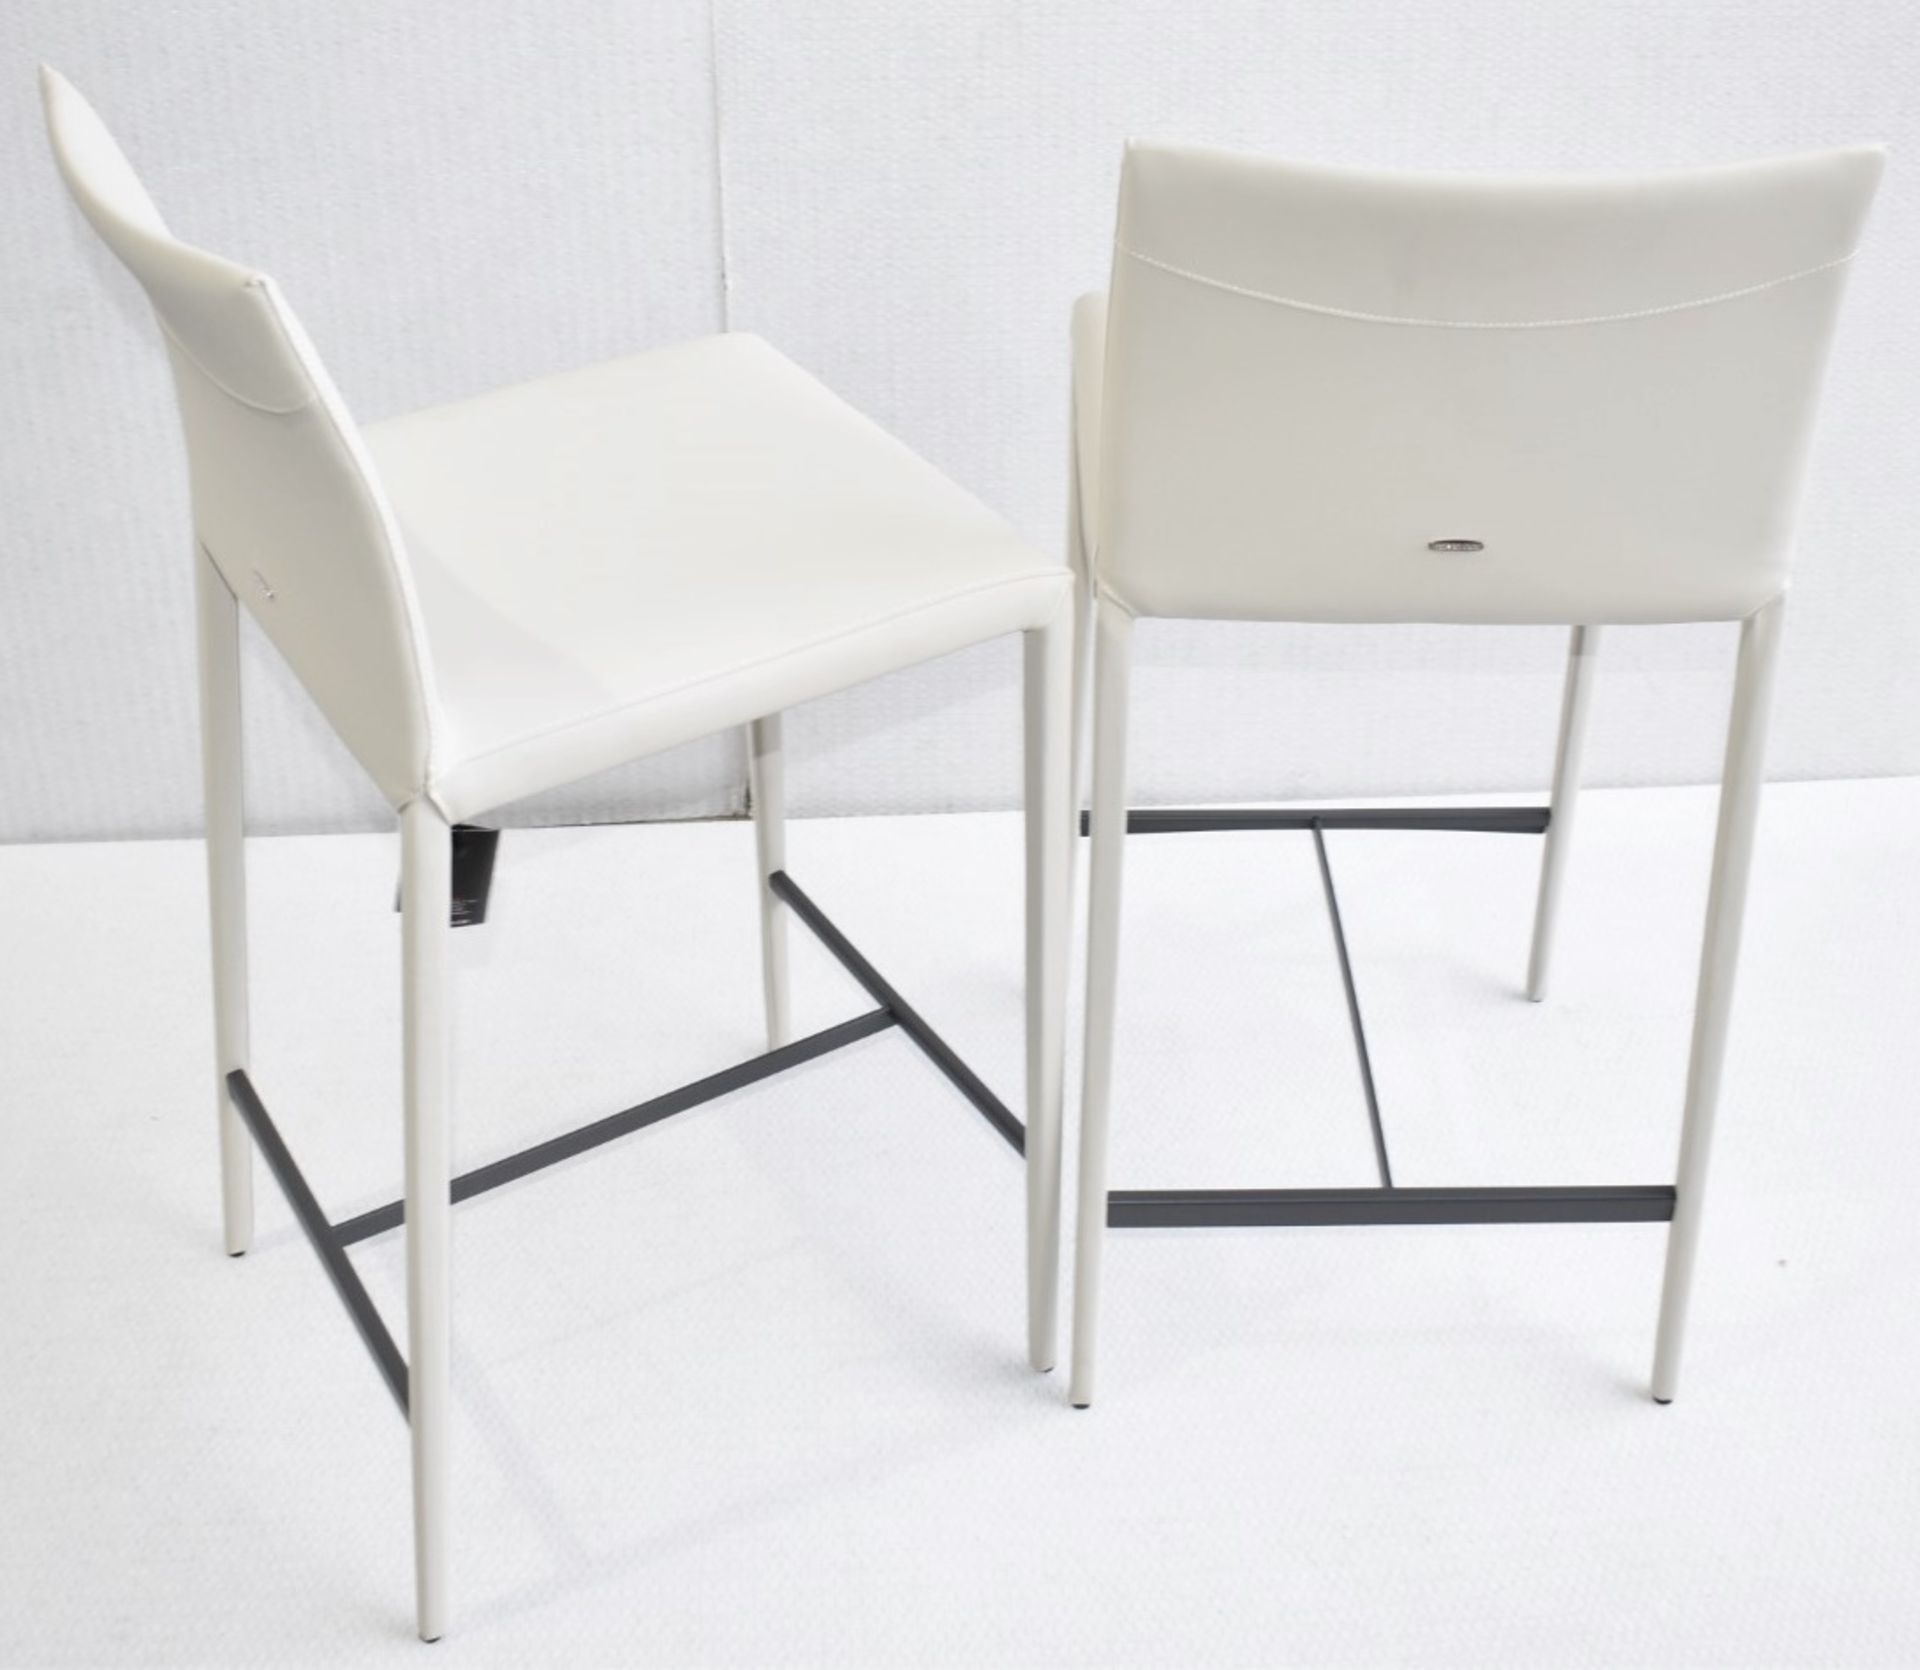 Pair of CATTELAN ITALIA 'Norma' Designer Fully Upholstered Stools in a Light Synthetic Leather - Image 5 of 9